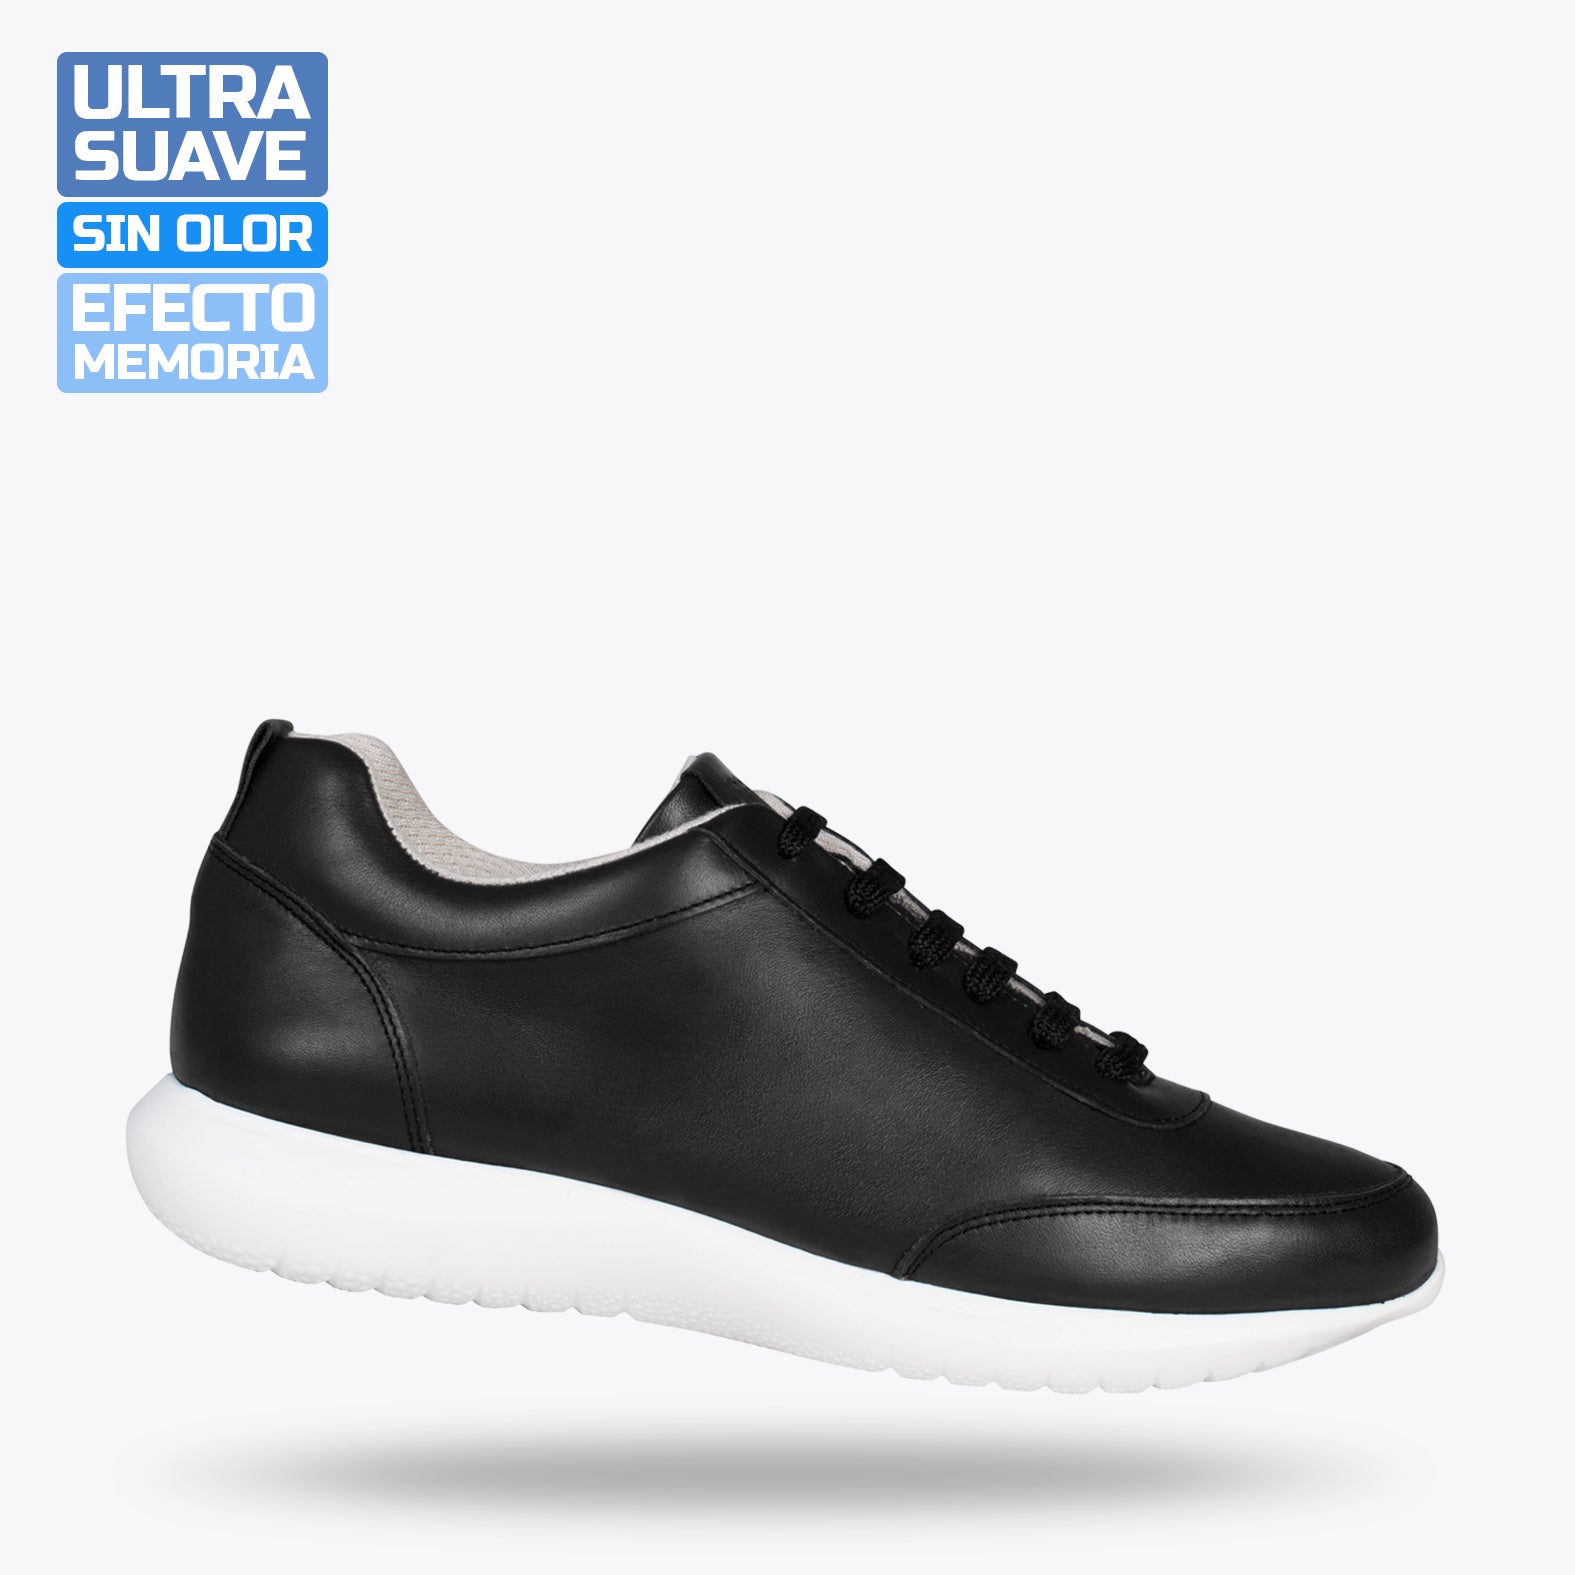 MIAMI – BLACK nappa leather sneakers with laces